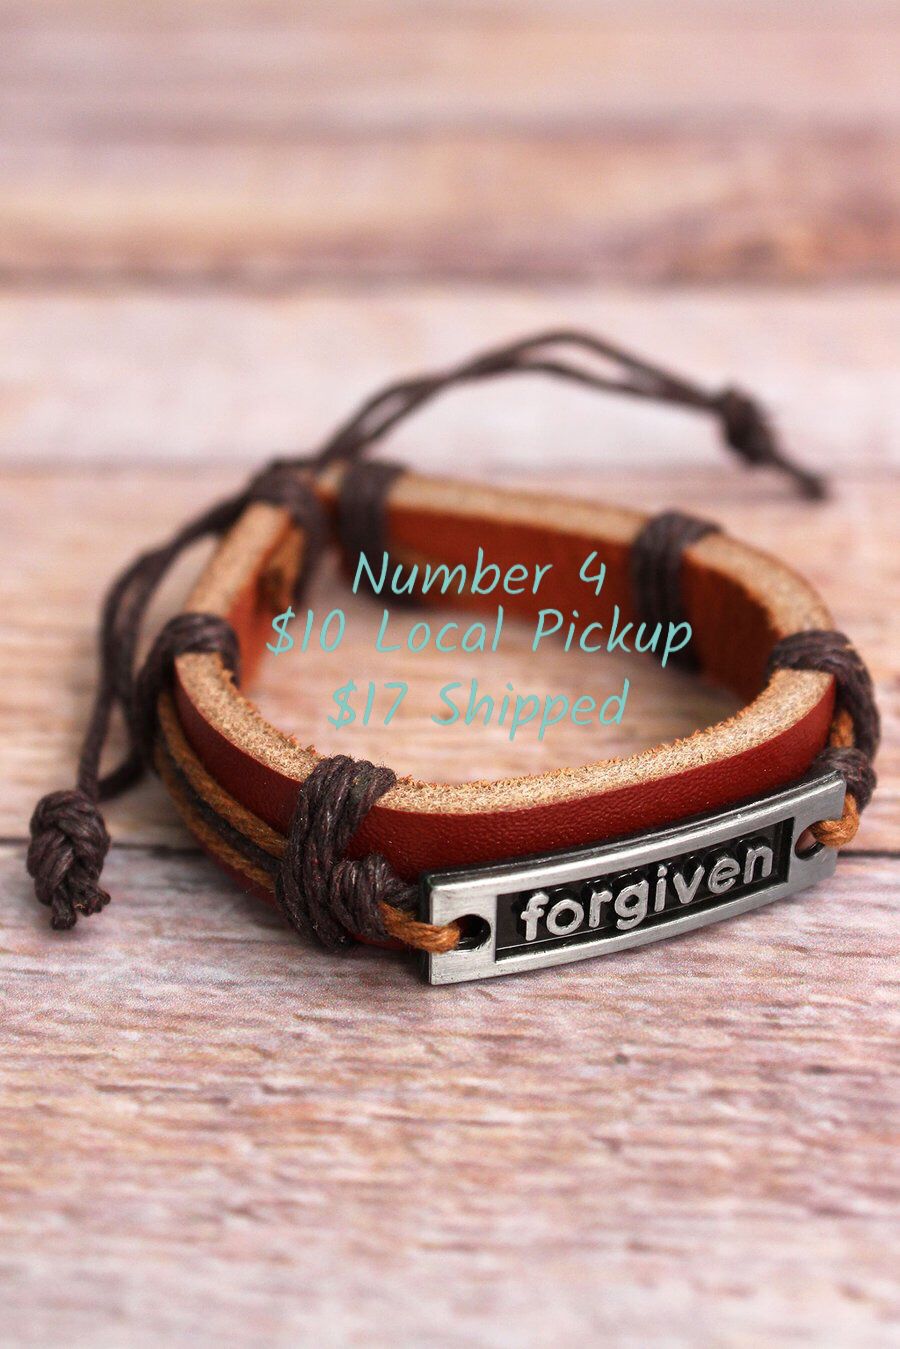 New in Package Faux Leather Adjustable Bracelet Forgiven Inspirational Christian